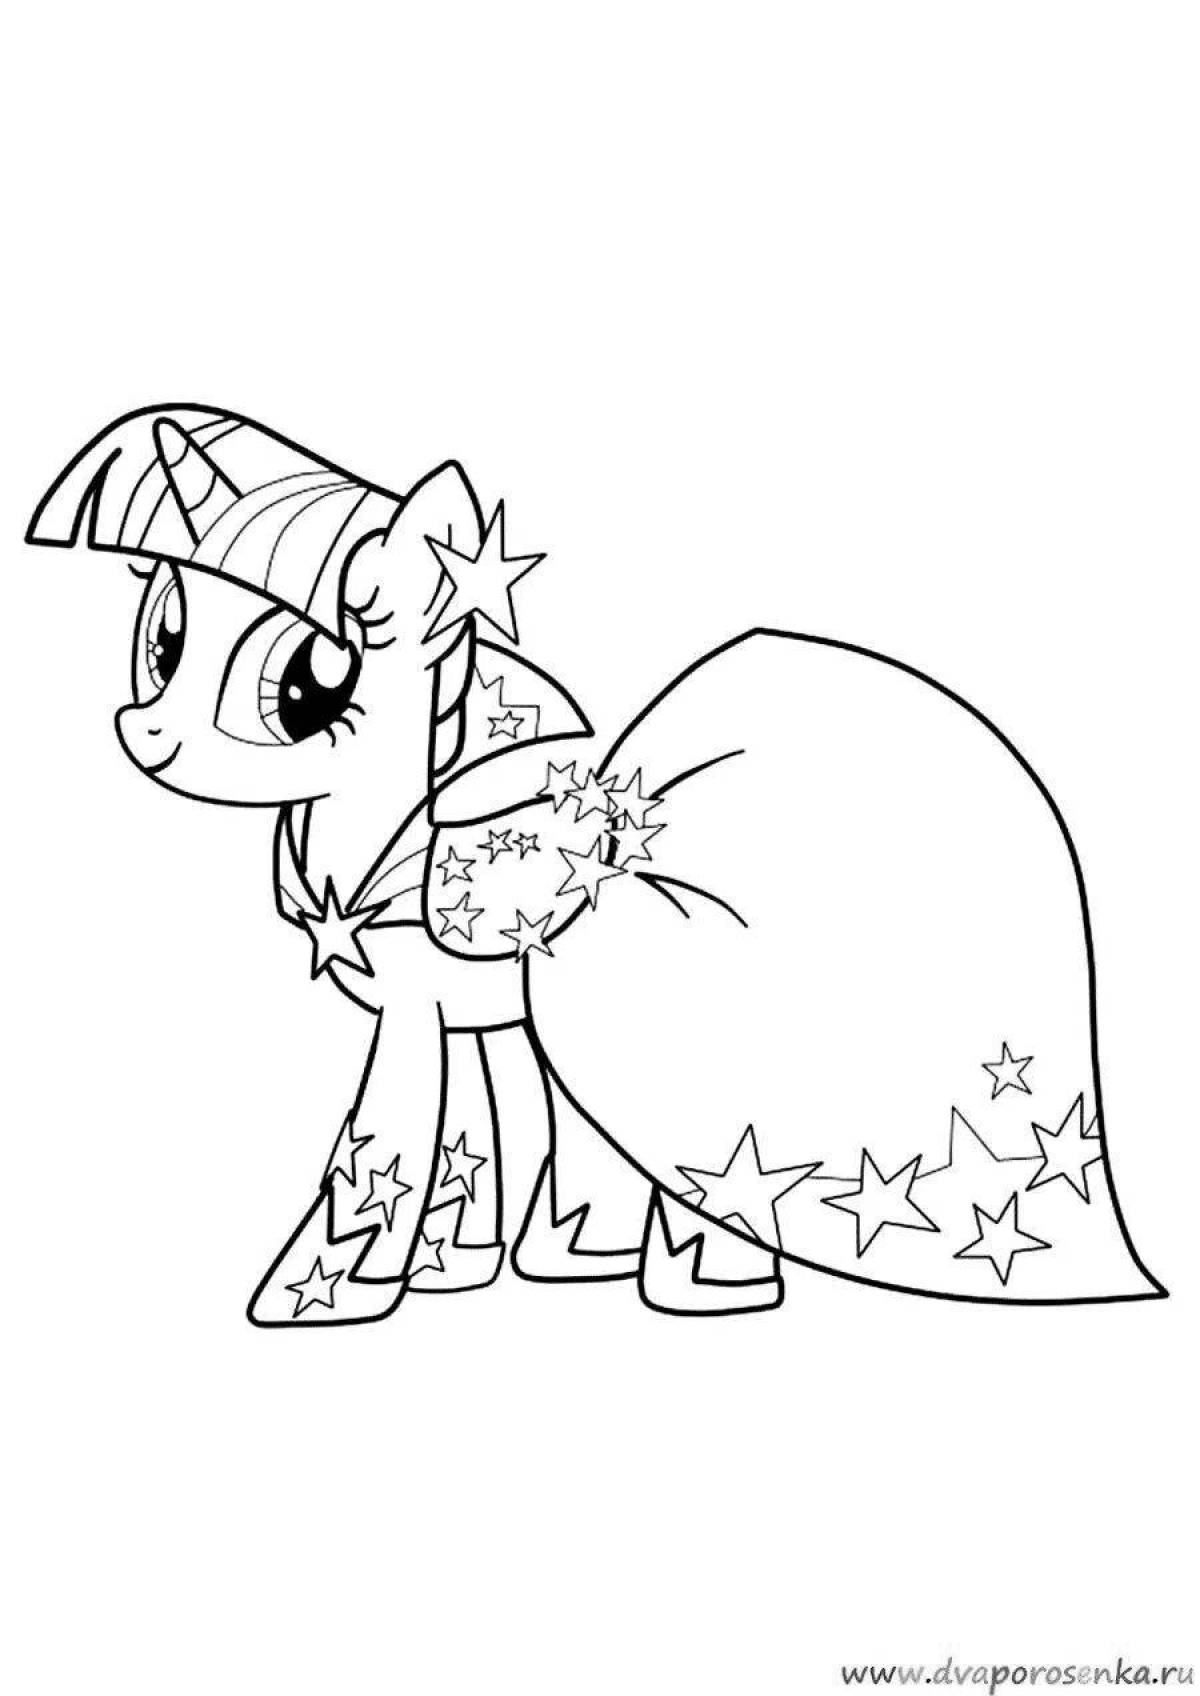 Great Twilight Sparkle Coloring Page